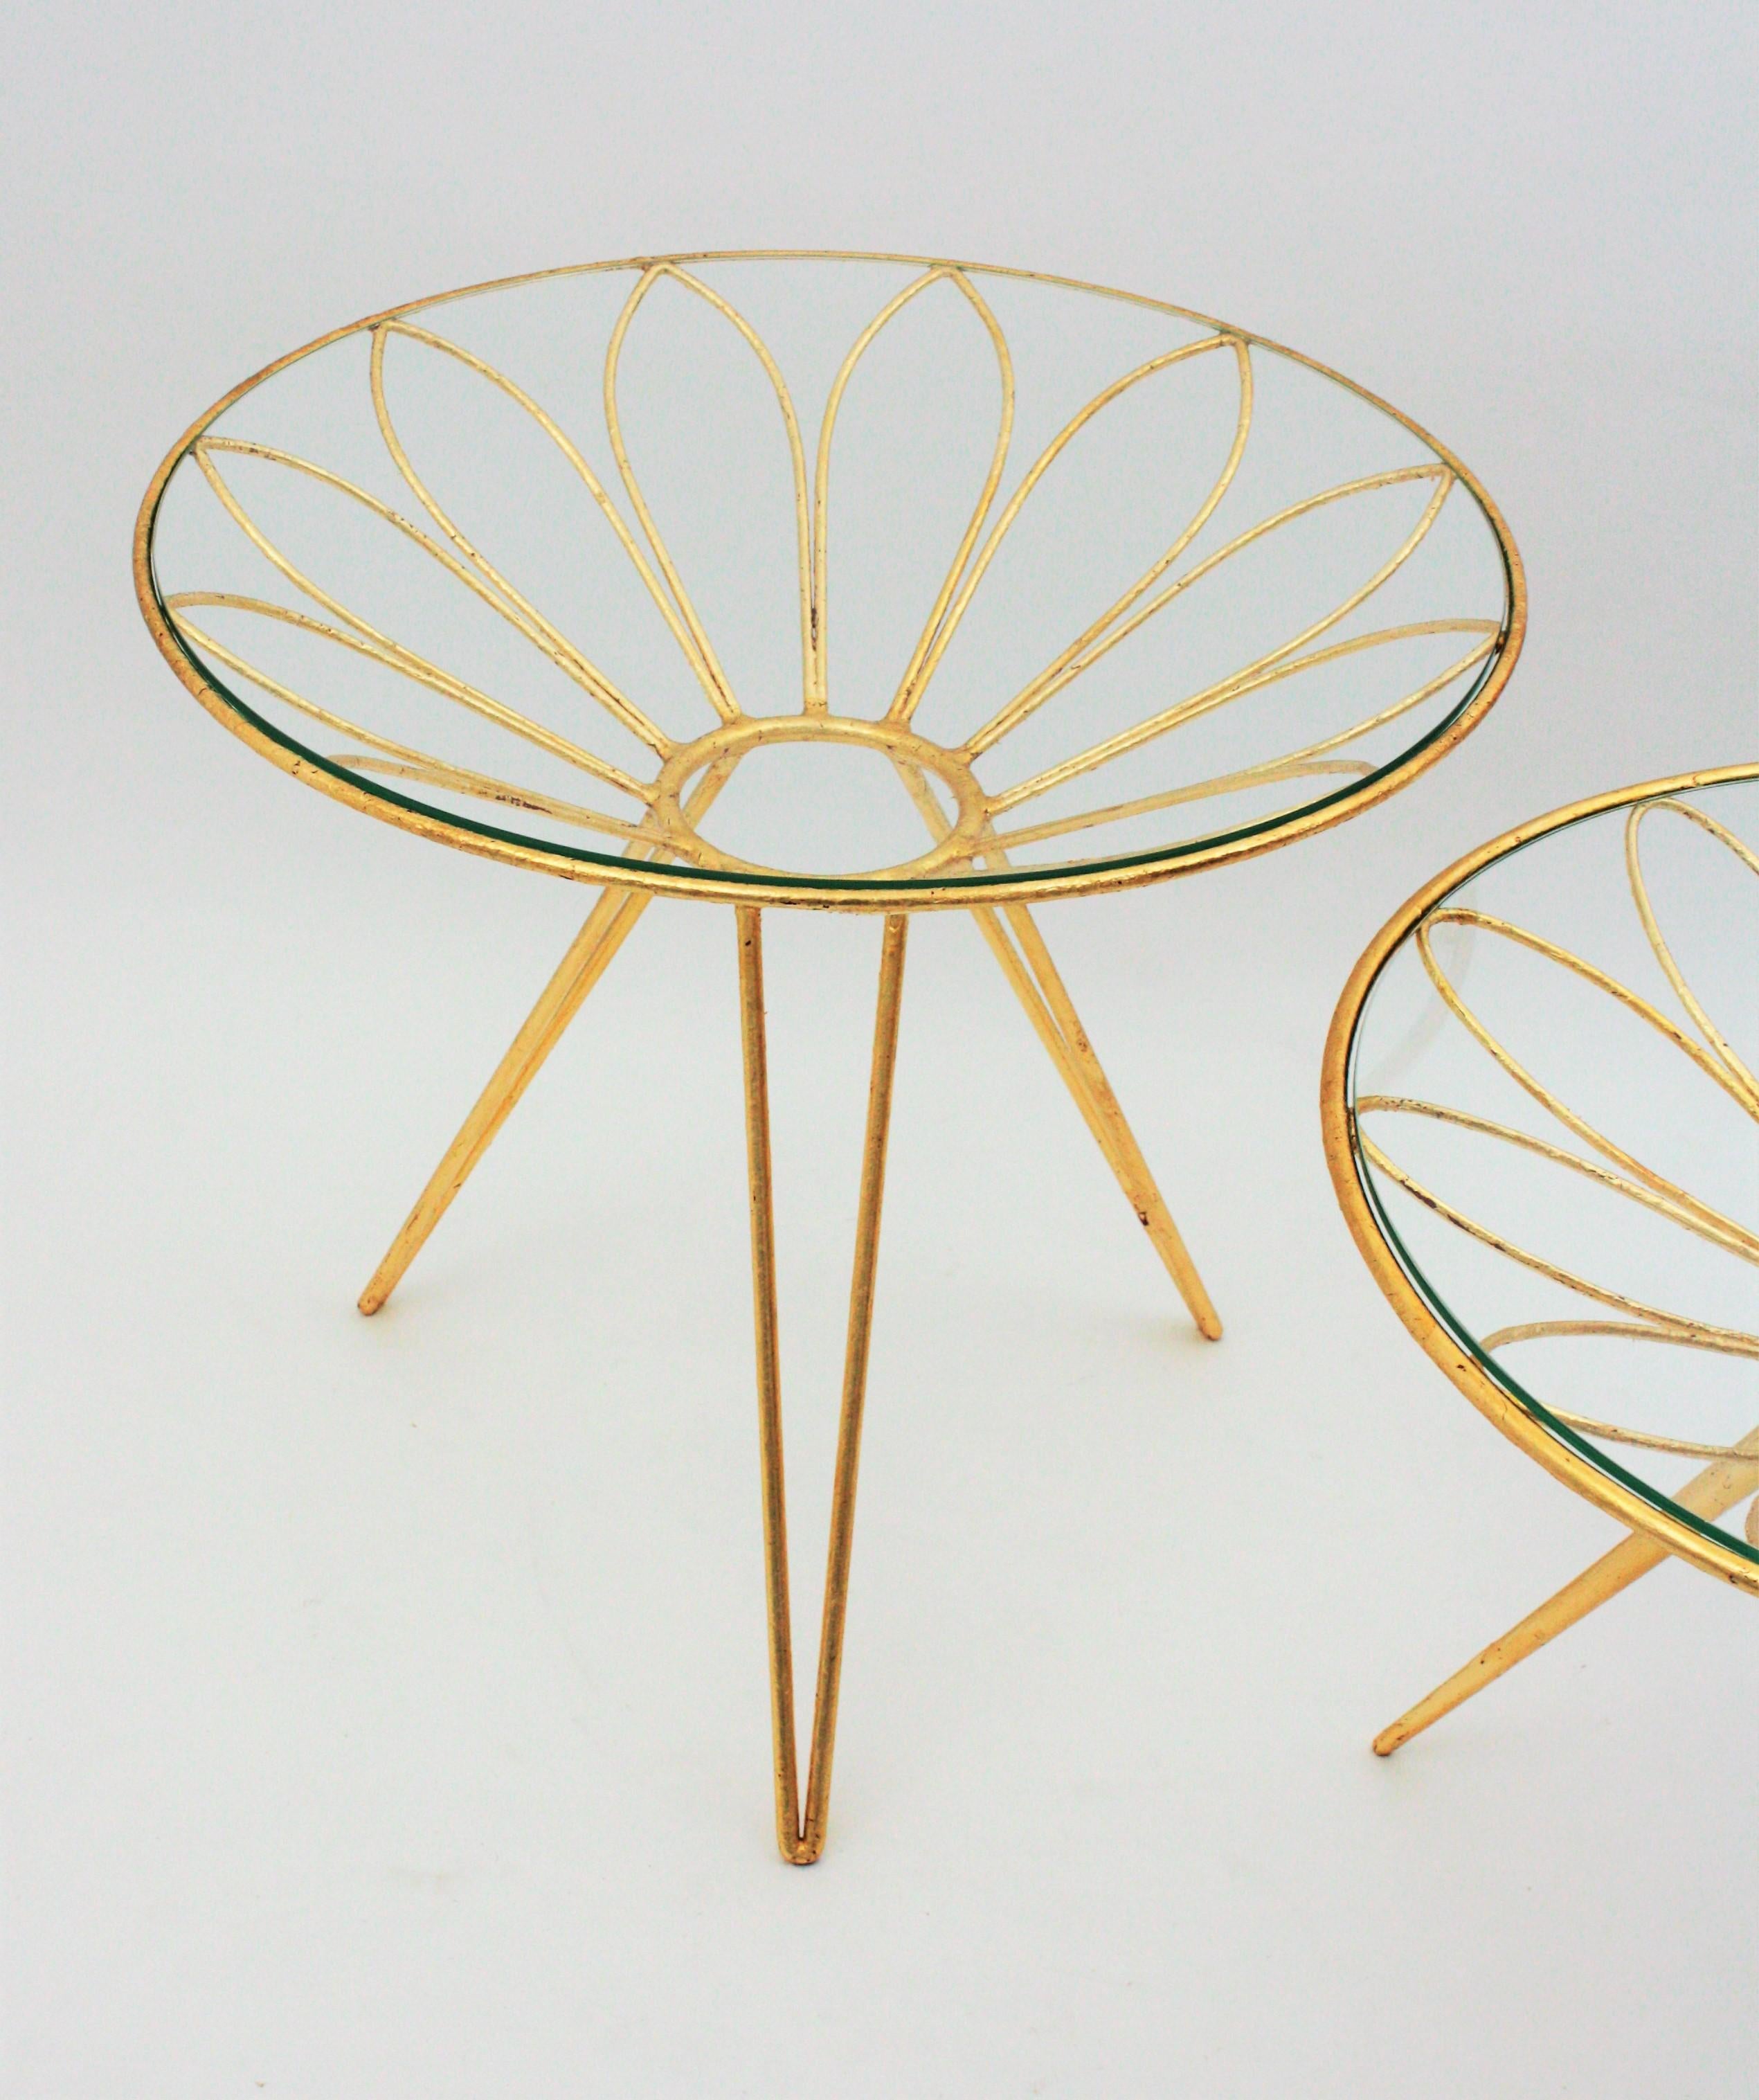 French Side Tables in Gilt Iron Daisy Flower Design, 1950s For Sale 2